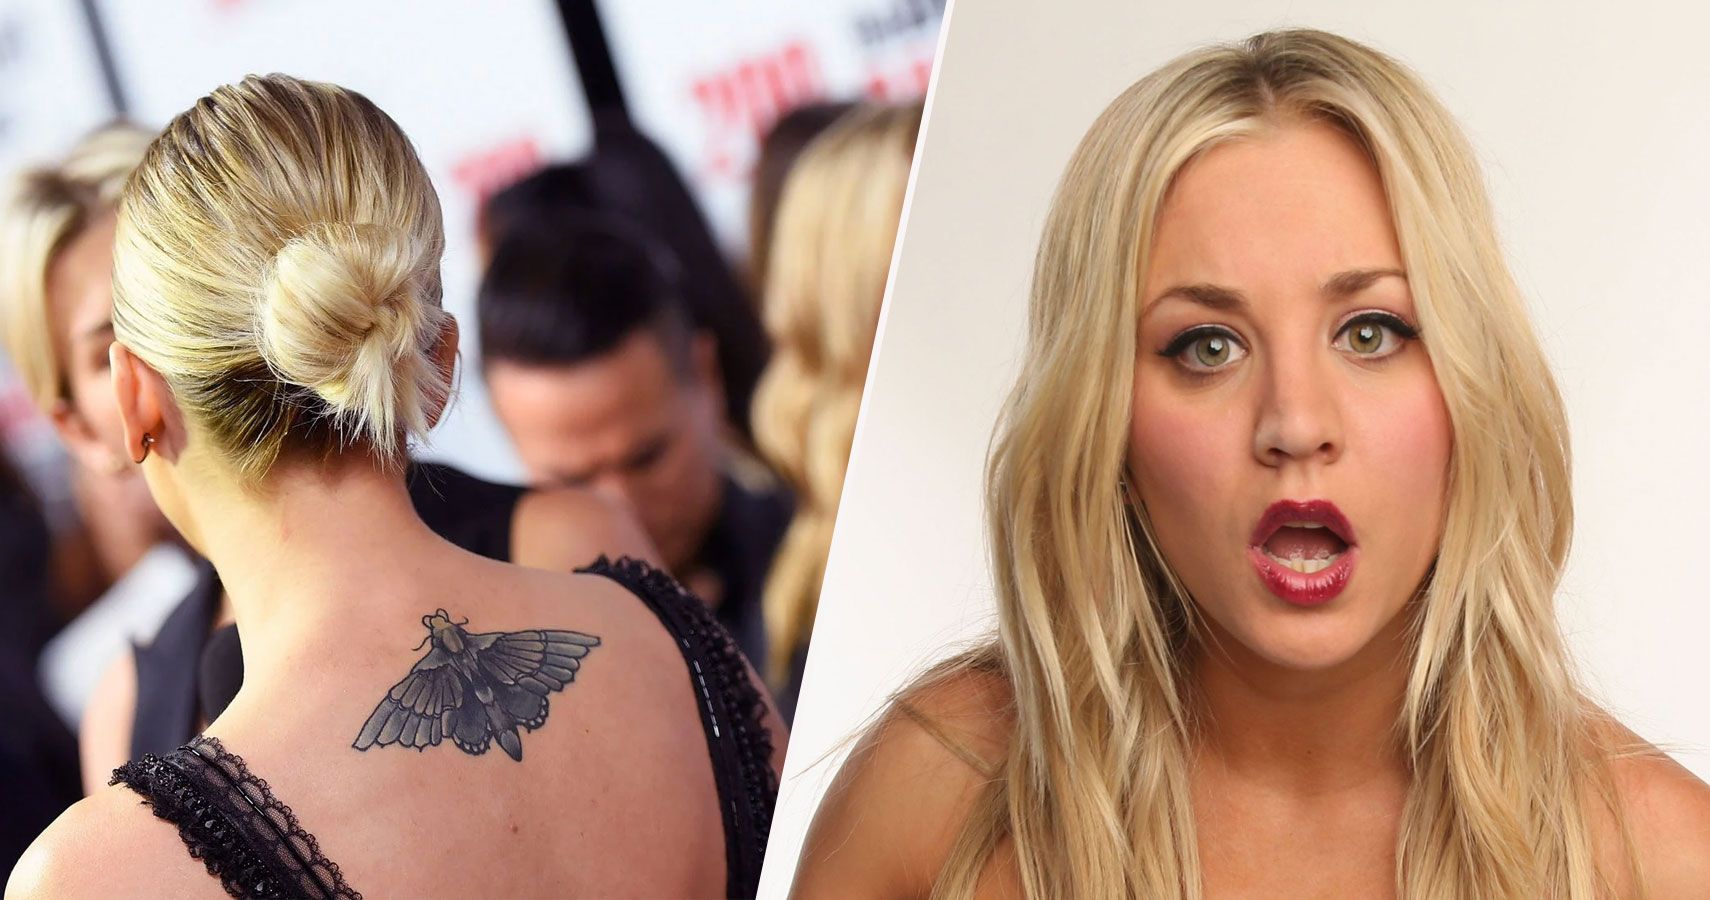 Here S Why Kaley Cuoco From Big Bang Theory Covered Her Tattoo Kaley cuoco stopped by to chat with ellen about life, love, and the big bang theory. big bang theory covered her tattoo